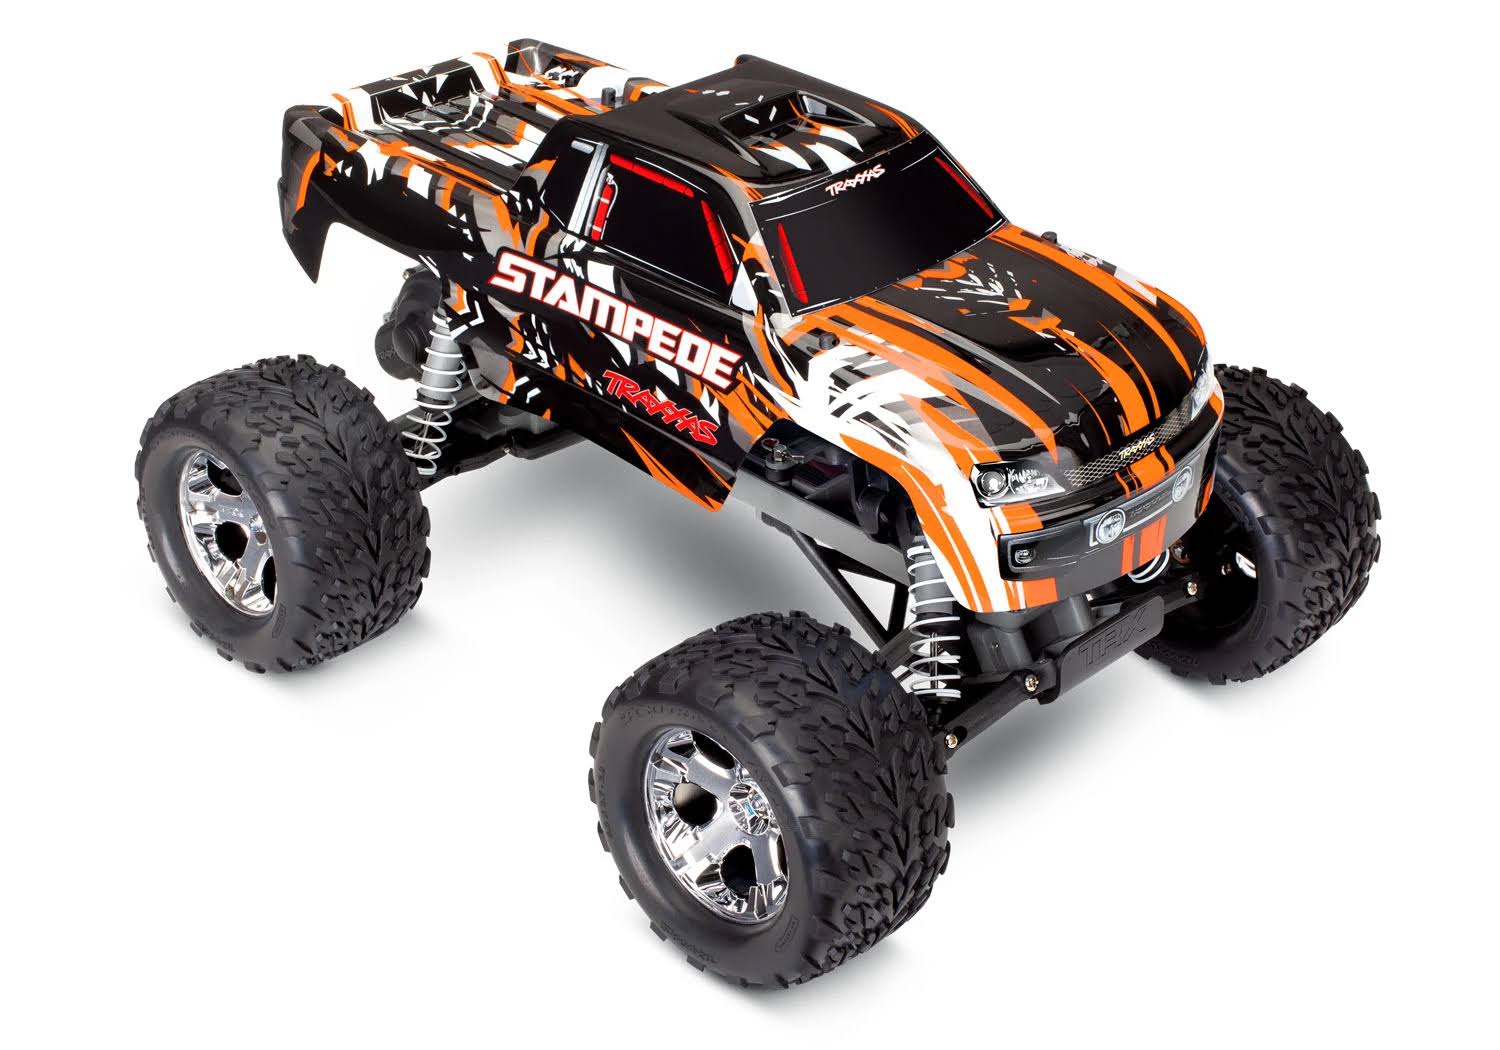 Traxxas 1/10 Stampede 2WD Monster Truck - Blue